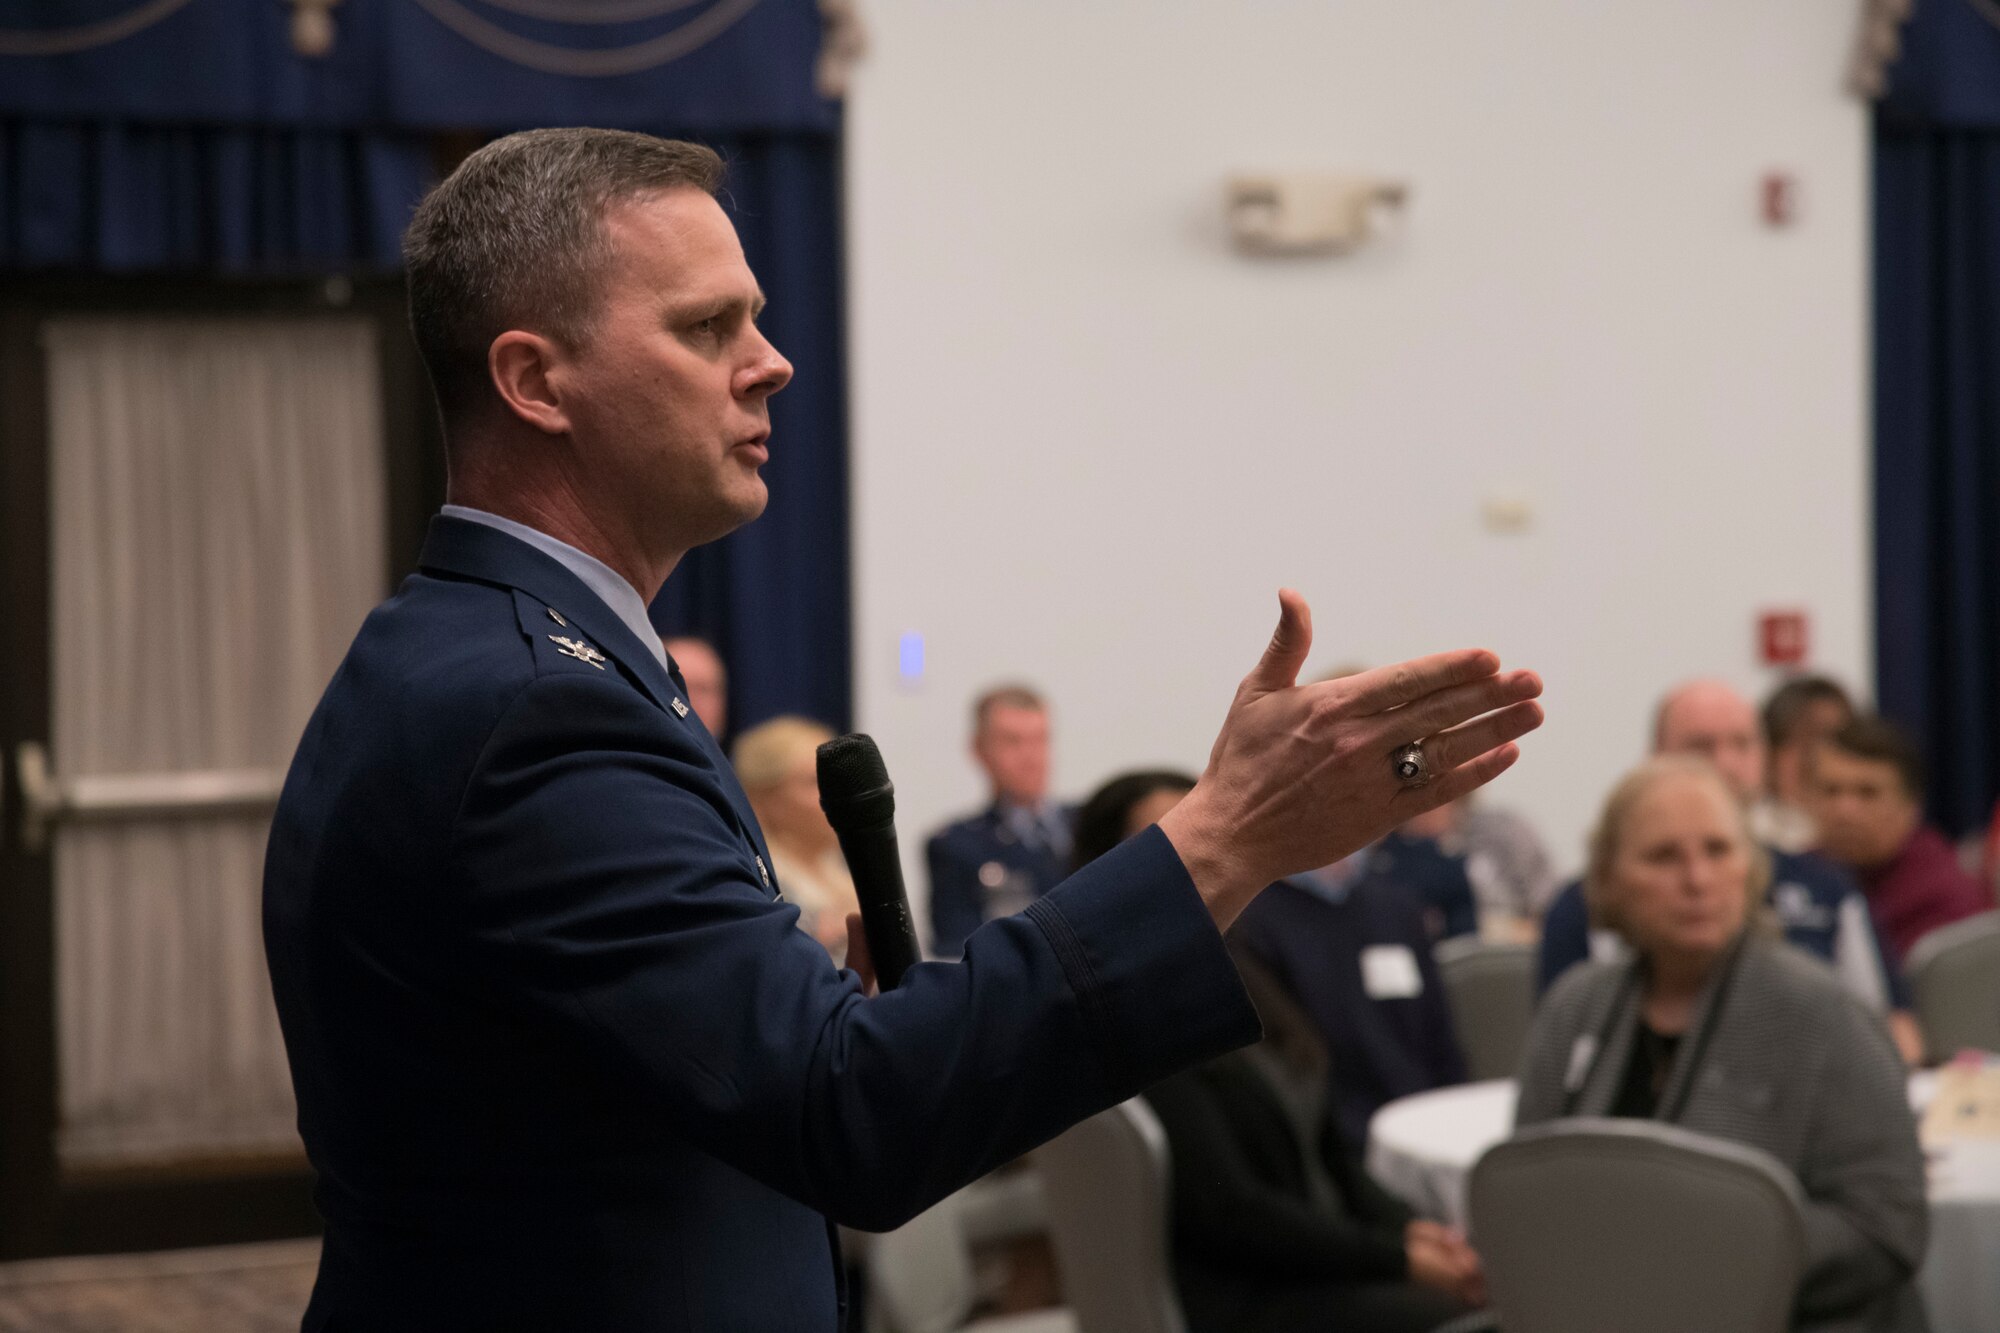 Col. Joel Safranek, 436th Airlift Wing commander, speaks to an audience of civil and military leaders during the Military Affaire event Jan. 23, 2019, at Dover Air Force Base, Delaware. The event is a social event, in which military and civil leaders come together to build partnerships for future initiatives. (U.S. Air Force photo by Airman 1st Class Jonathan W. Harding)